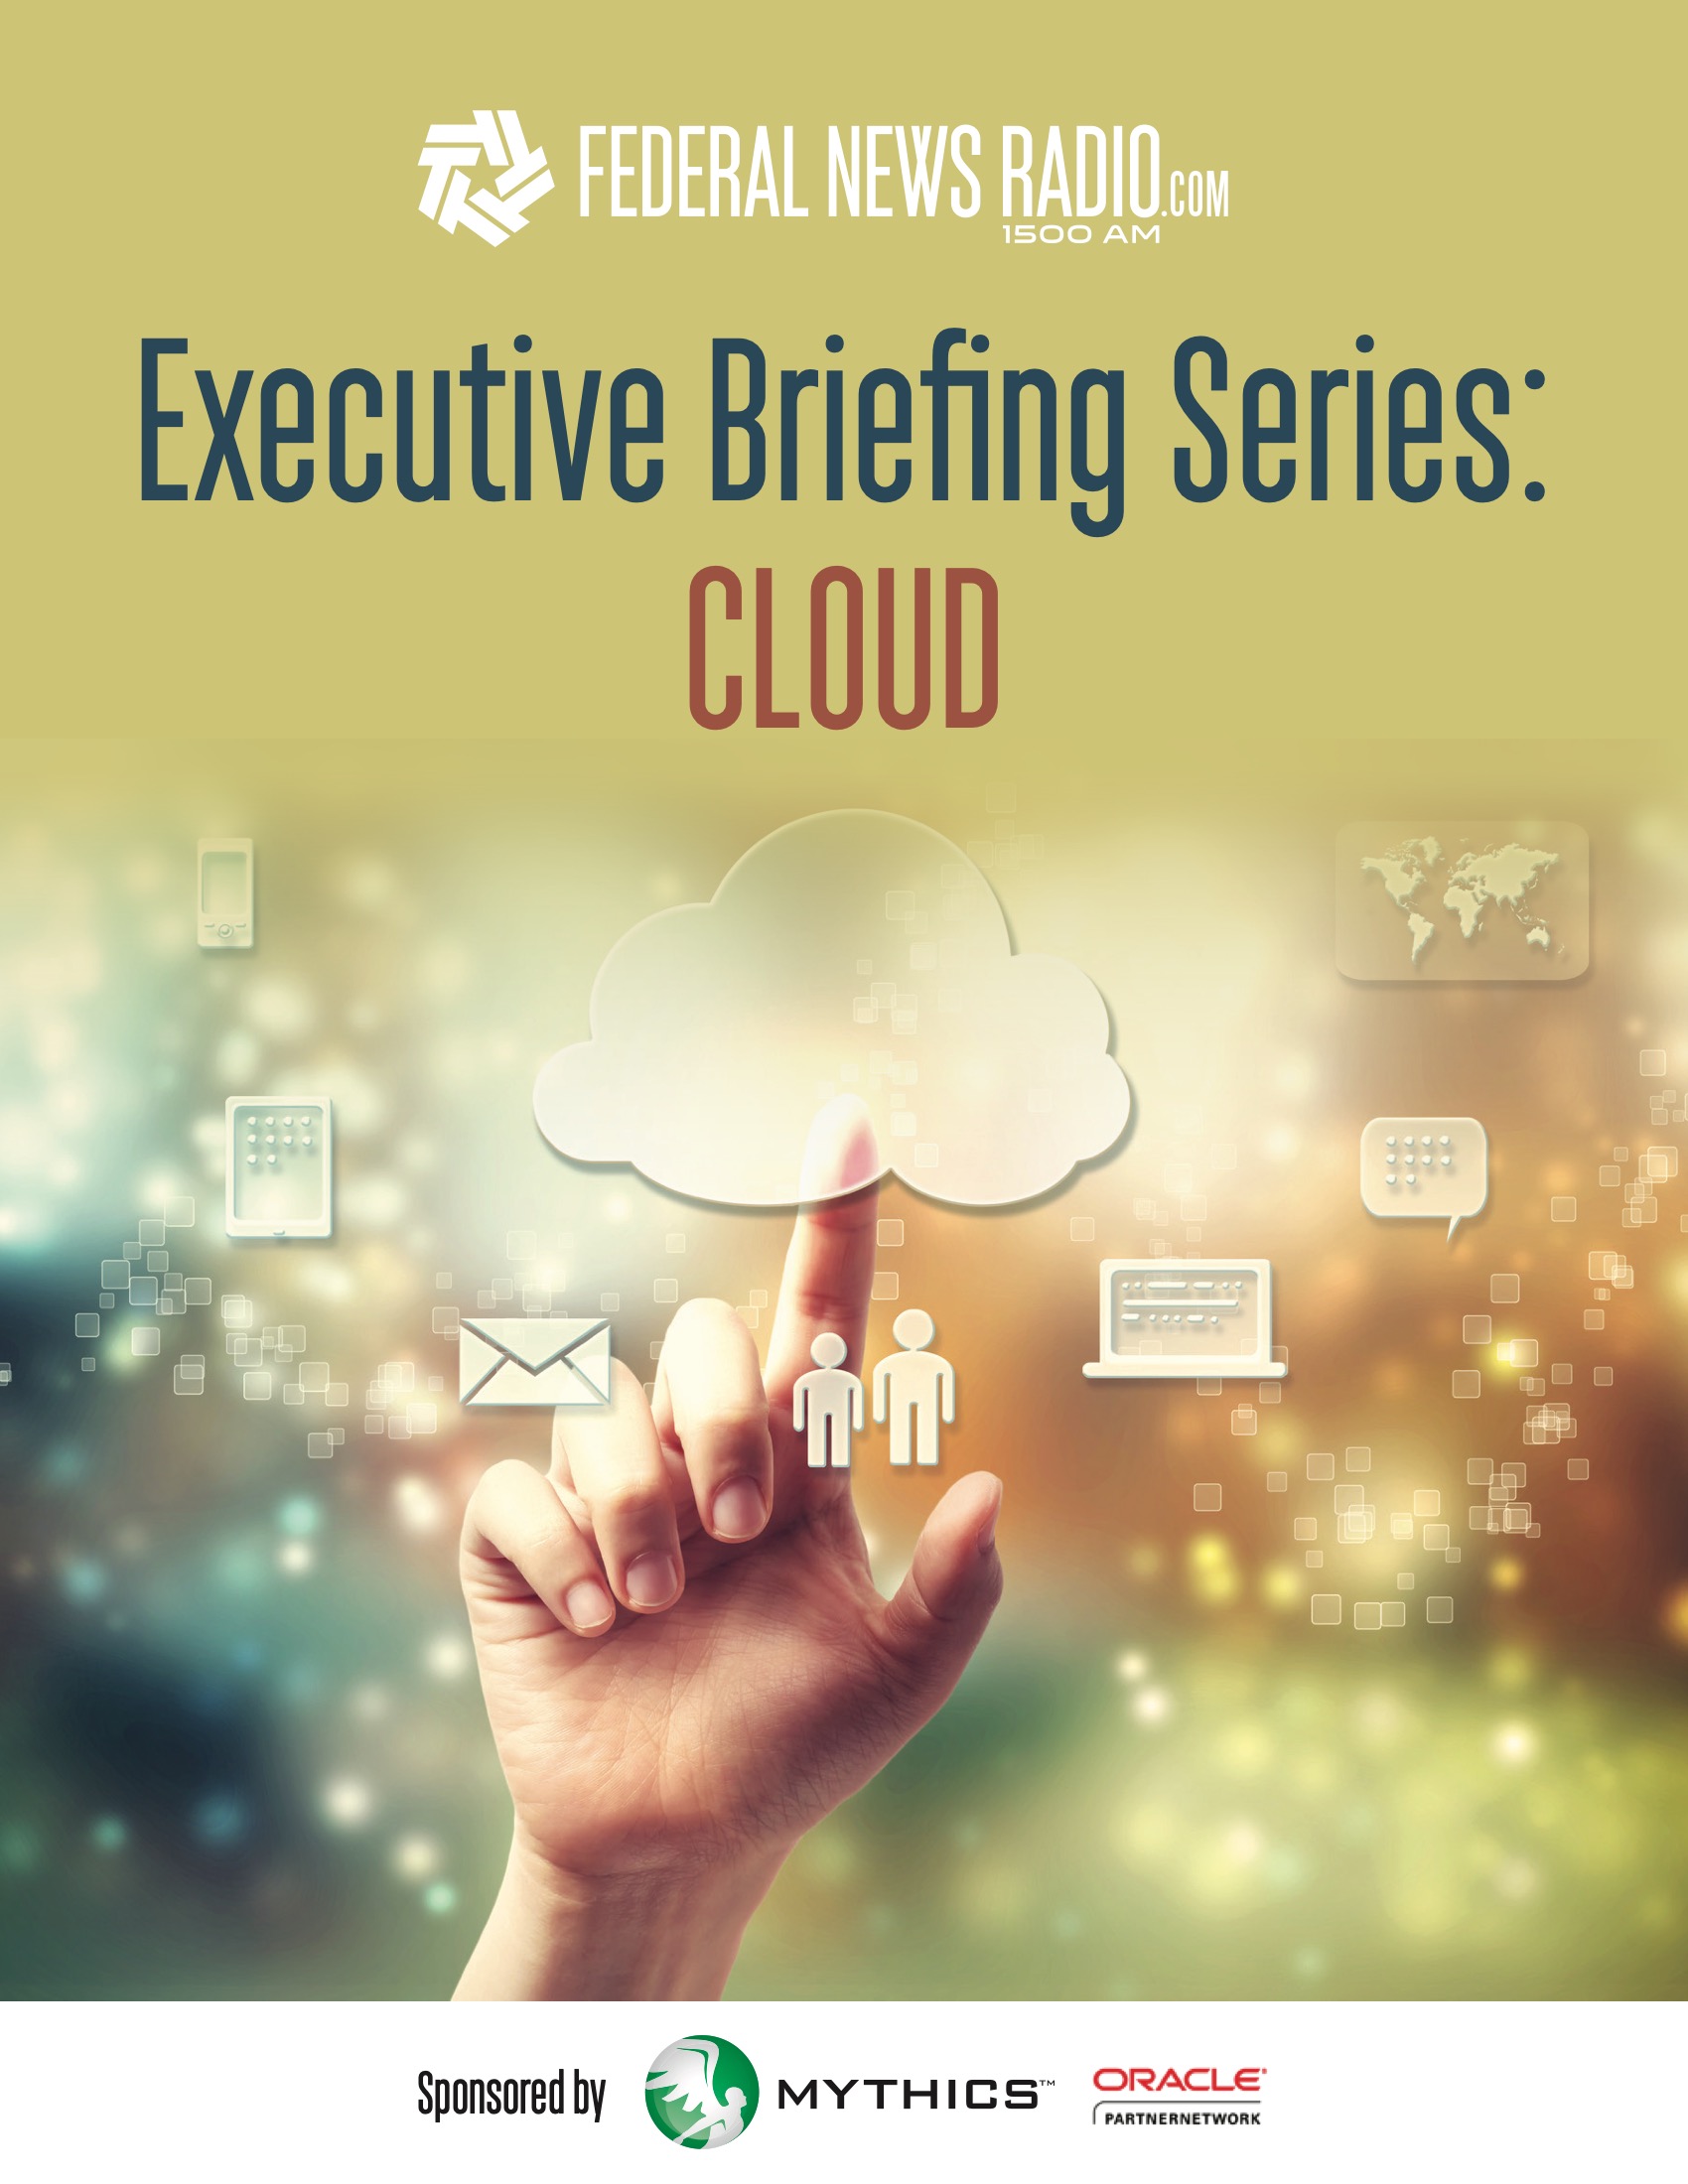 https://mythics.com/wp-content/uploads/2022/06/Mythics_Oracle_WTOP_Cloud_Briefing_-15.jpeg